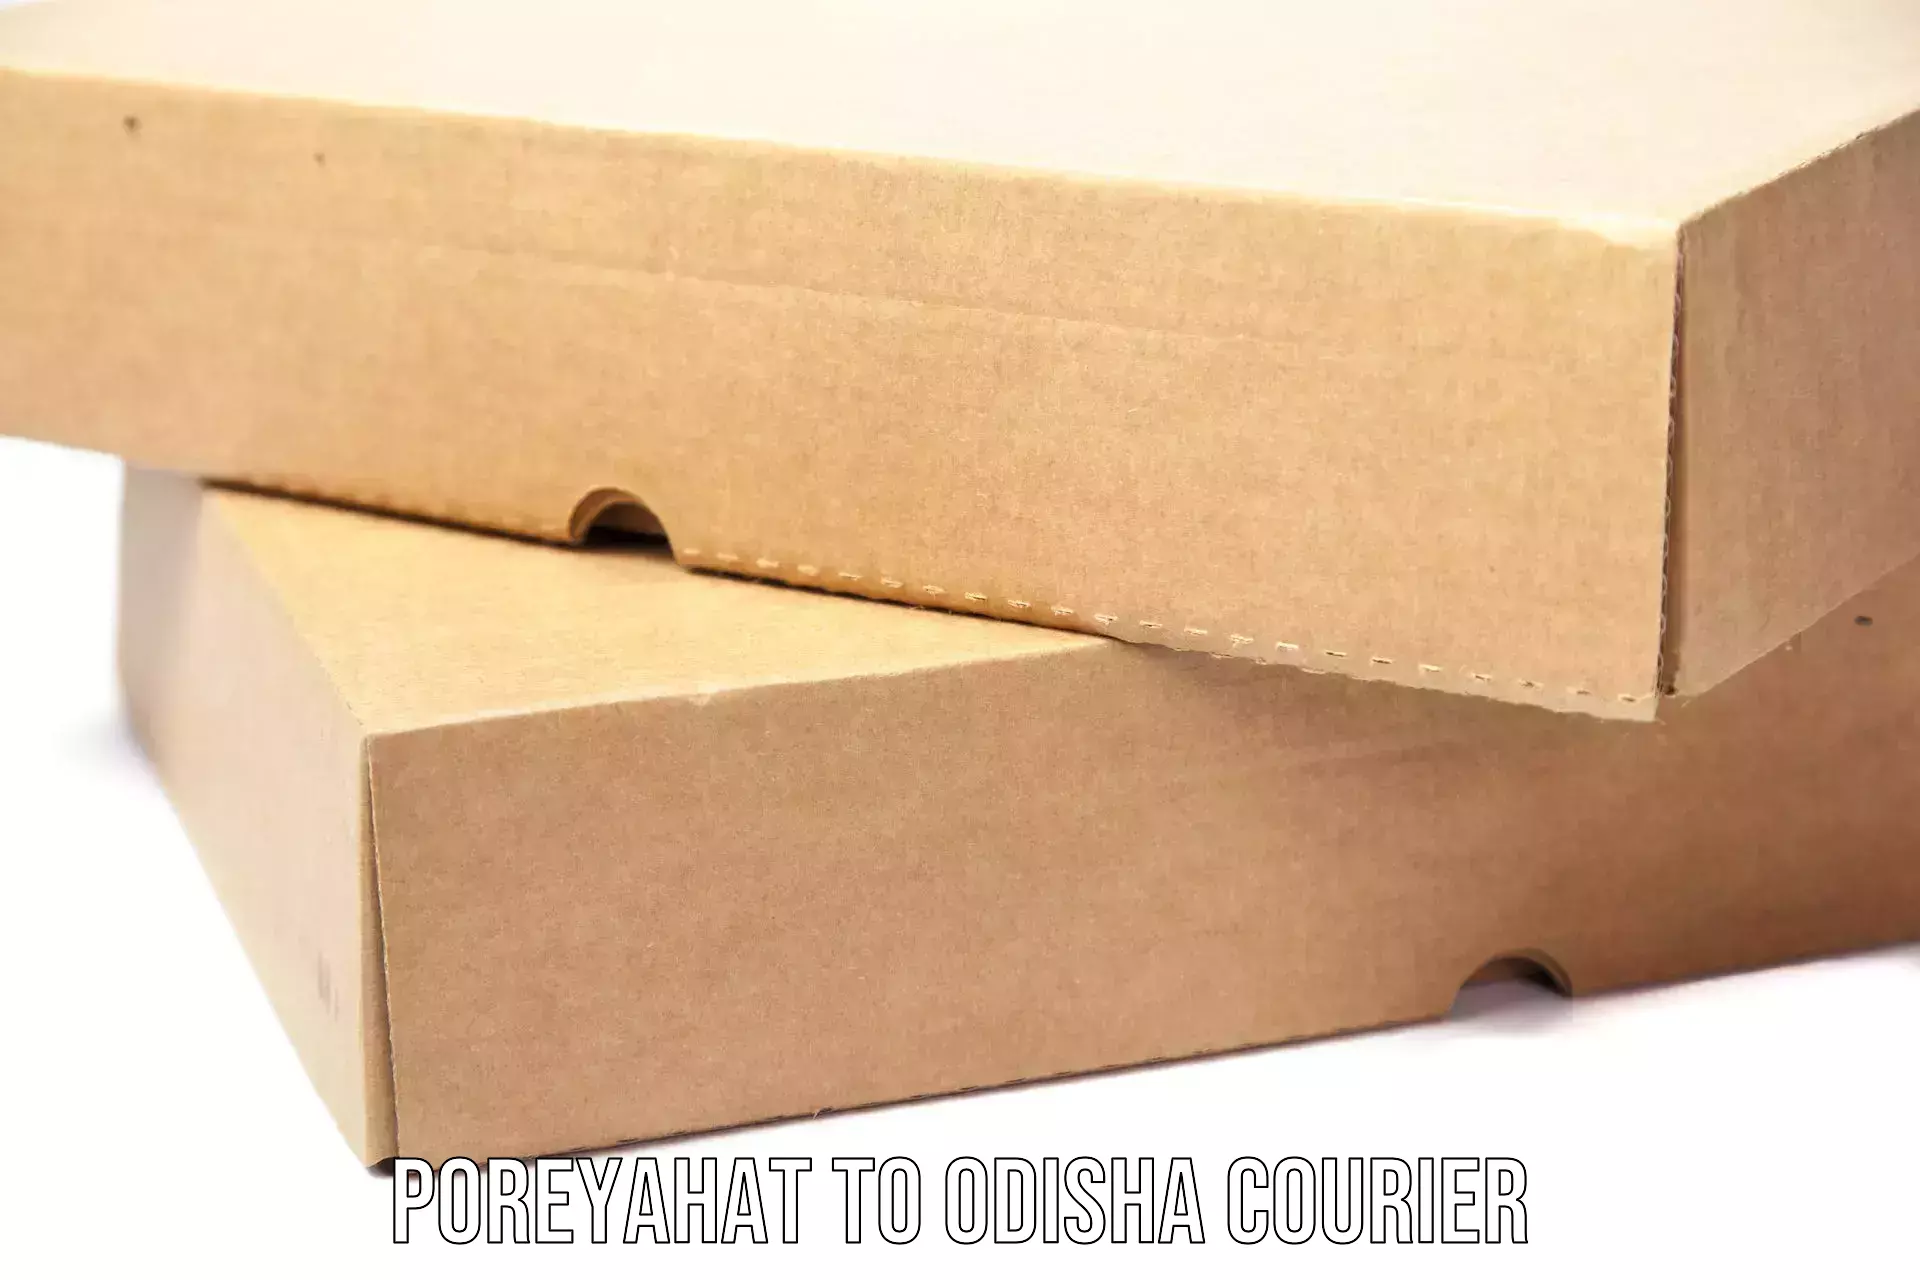 Package consolidation Poreyahat to Sohela